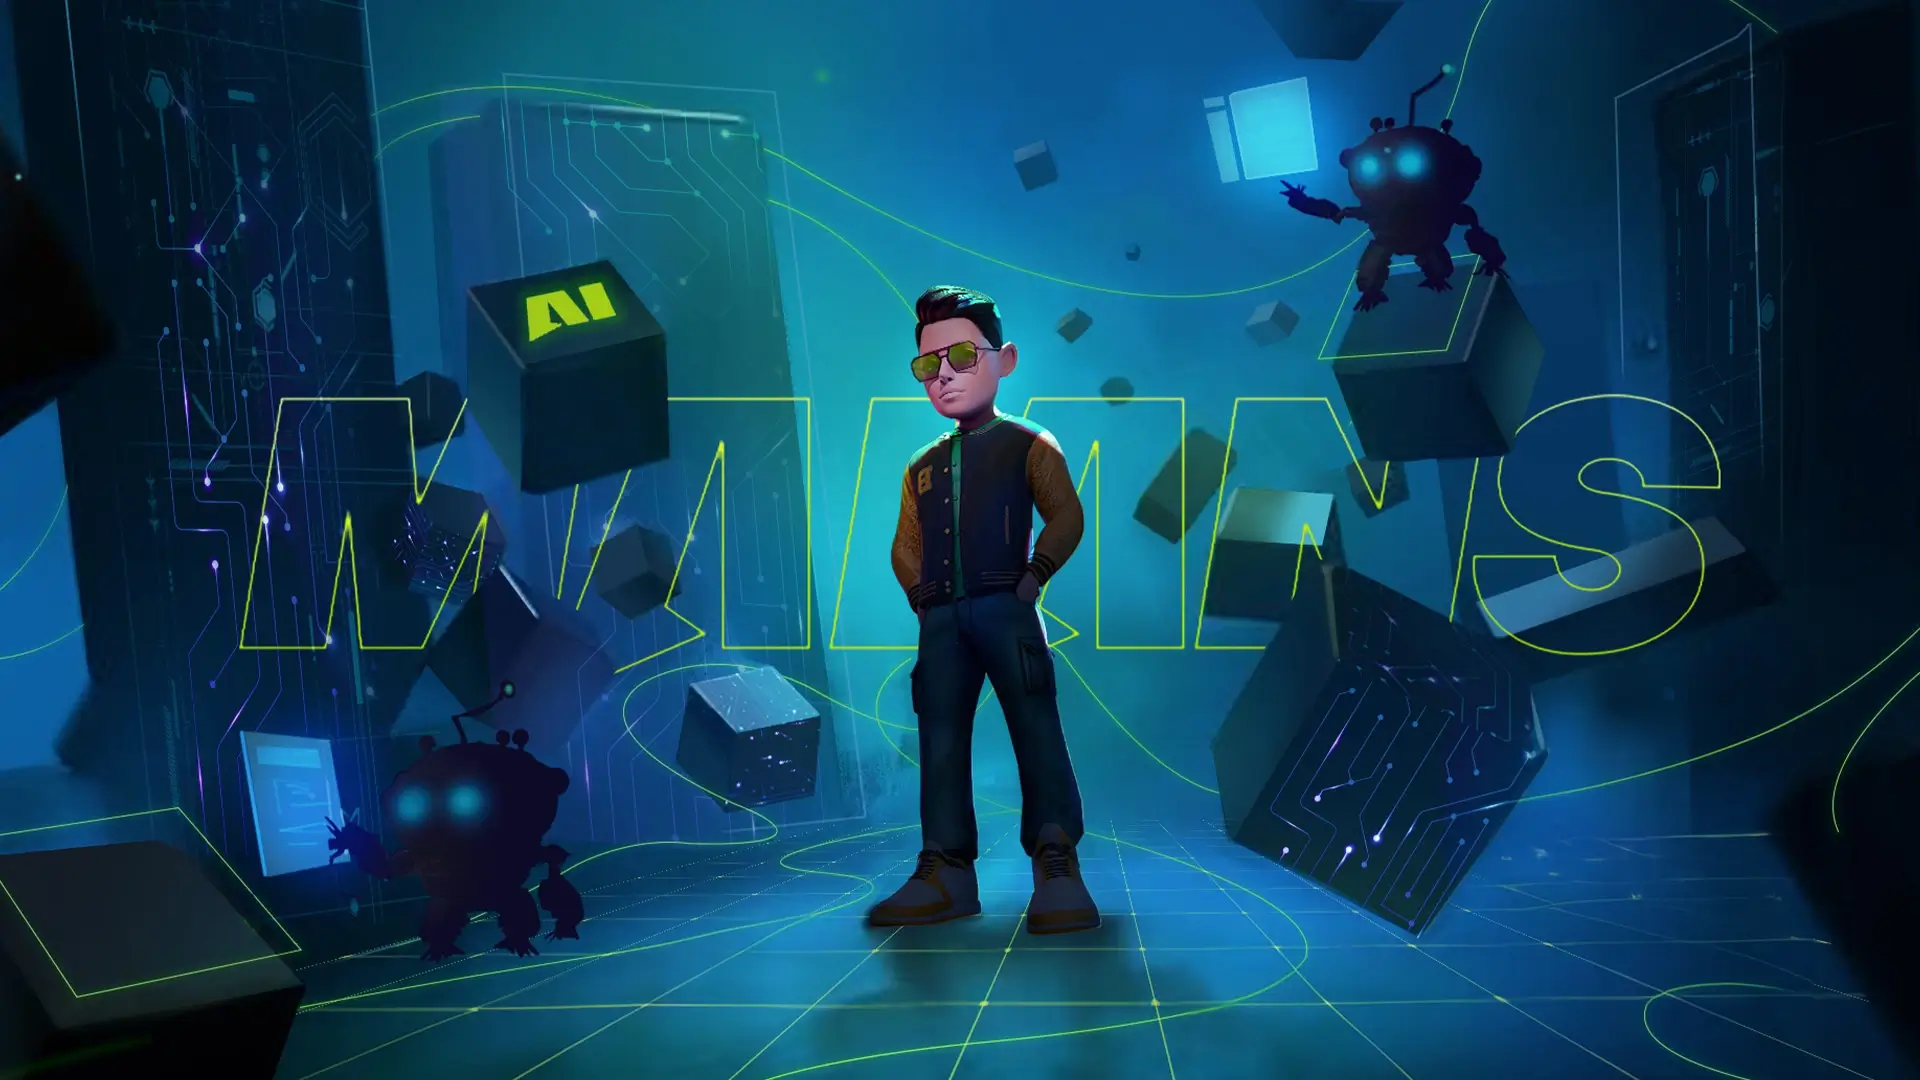 A stylish avatar posing with “Maians” written in the background in a futuristic blue space
                        with blocks and androids.